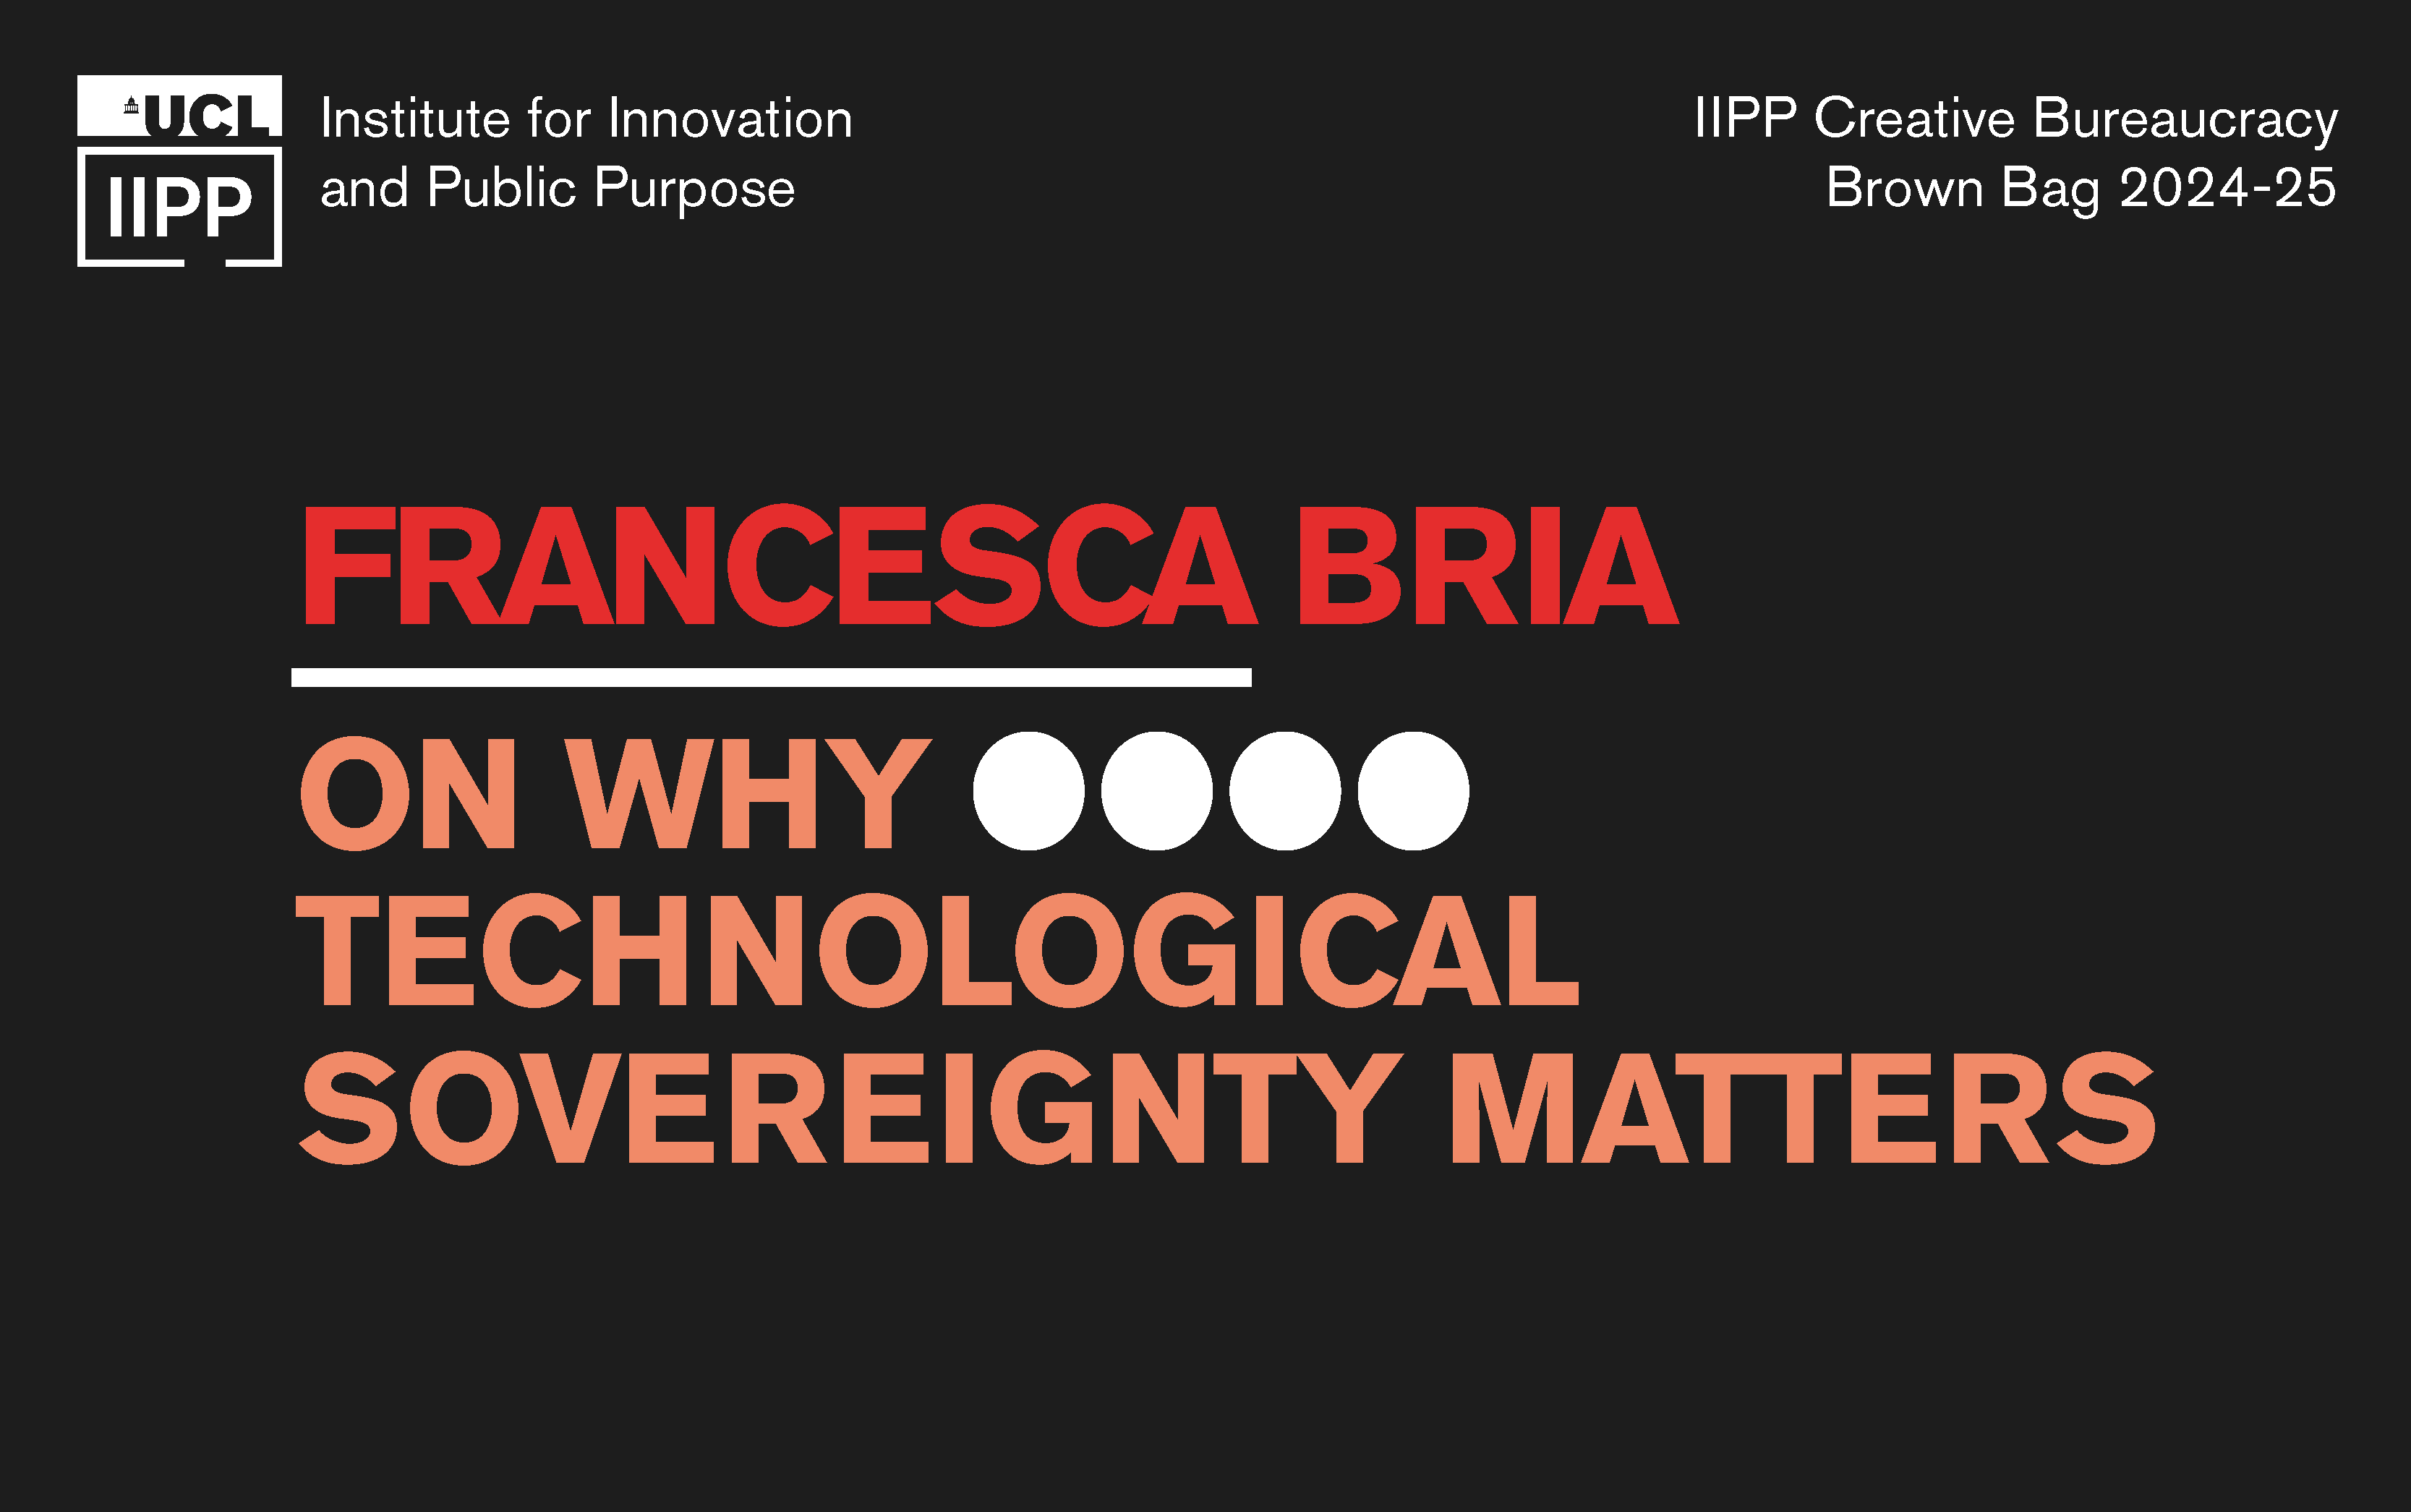 Francesca Bria on why technological sovereignty matters